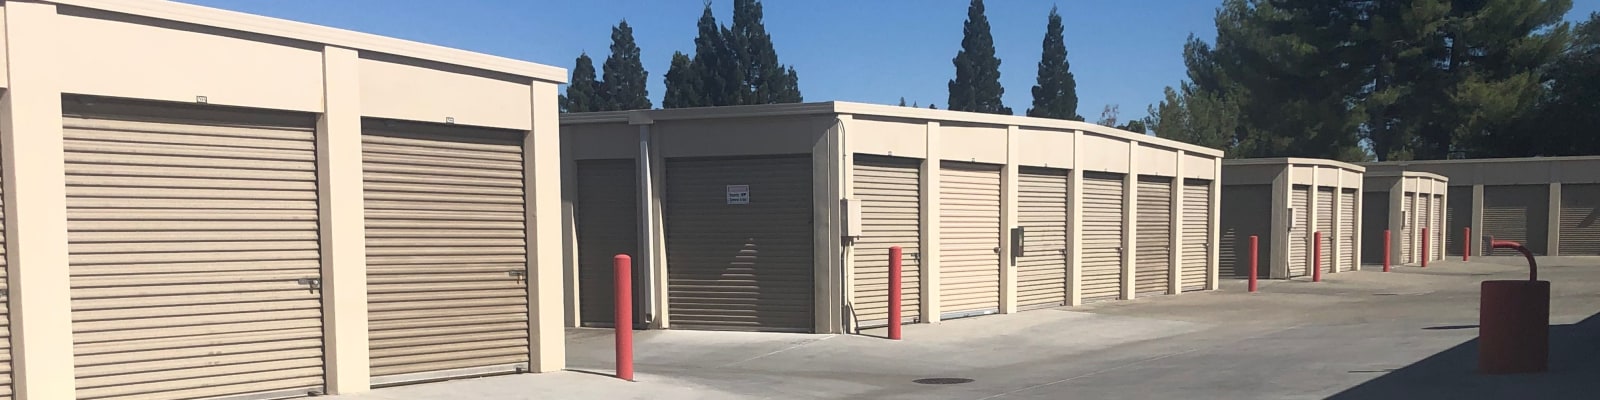 map & directions to Gold Country Self Storage in Folsom, California